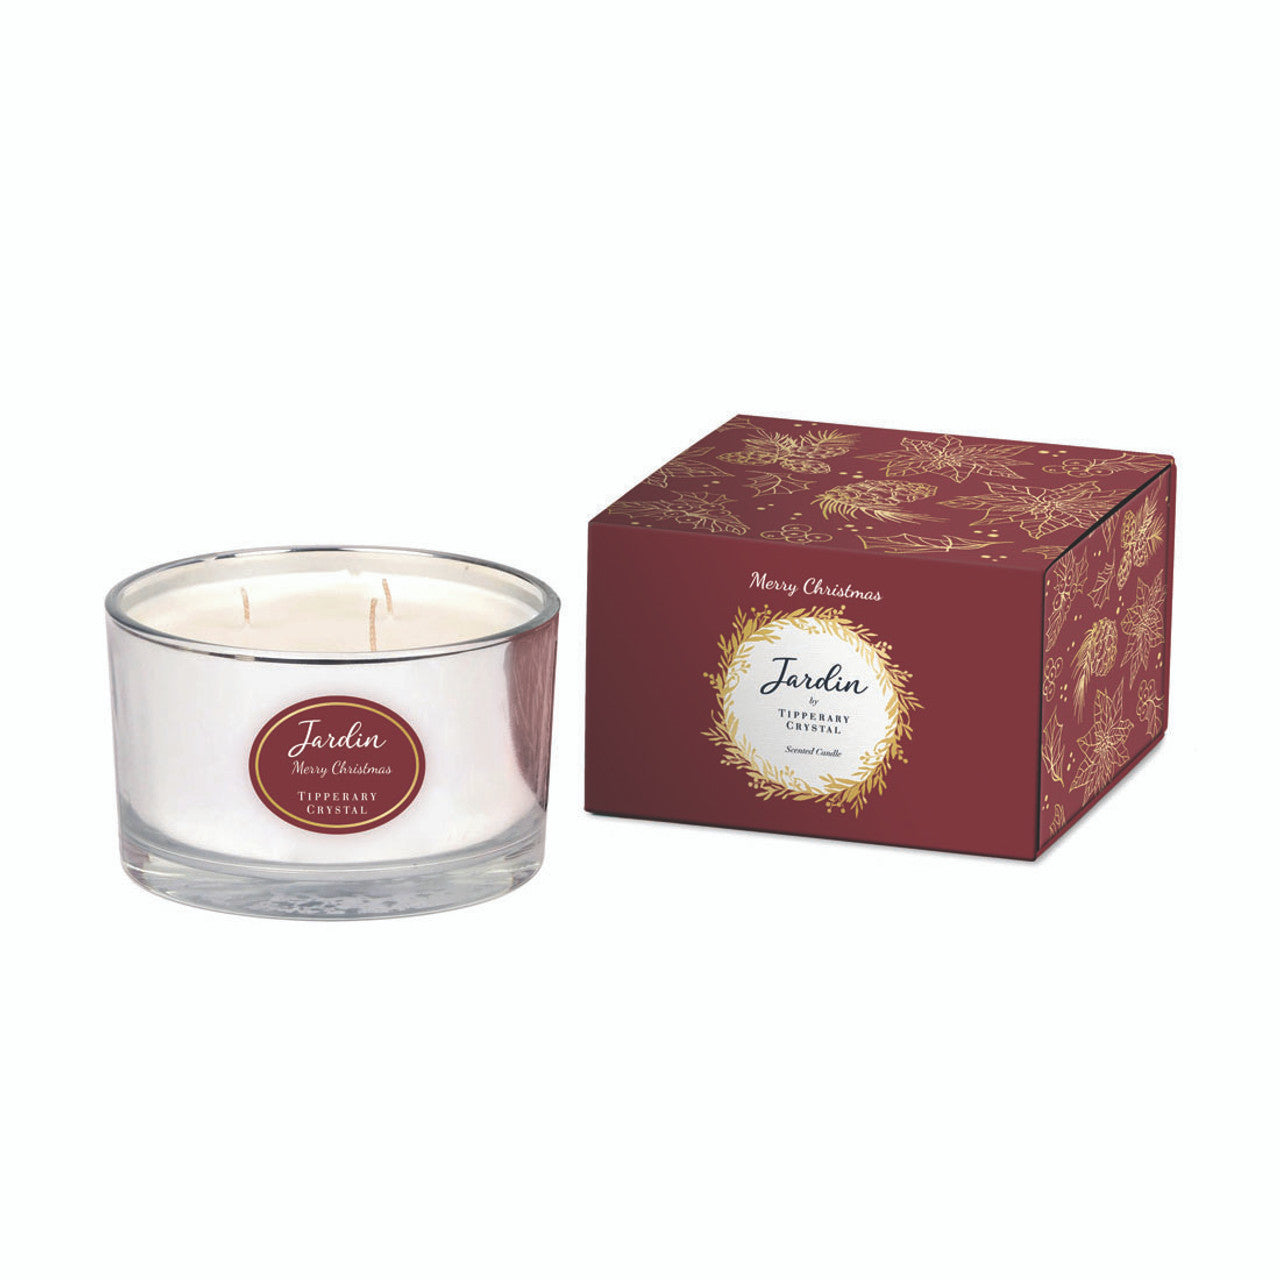 Tipperary Crystal Jardin 3 Wick Candle - Merry Christmas  This scent is a blend of Orange, Almond, Lime and Lemon that then gives way to the main body fragrance of Red Berry, Cinnamon and Nutmeg. Bringing Christmas to life!  Inspired by the warm, spicy aromas of the festive season Tipperary Crystal have produced the most beautiful collection of Christmas inspired scented candles and fragrance diffuser sets all of which are presented in exquisitely designed festive gift boxes.